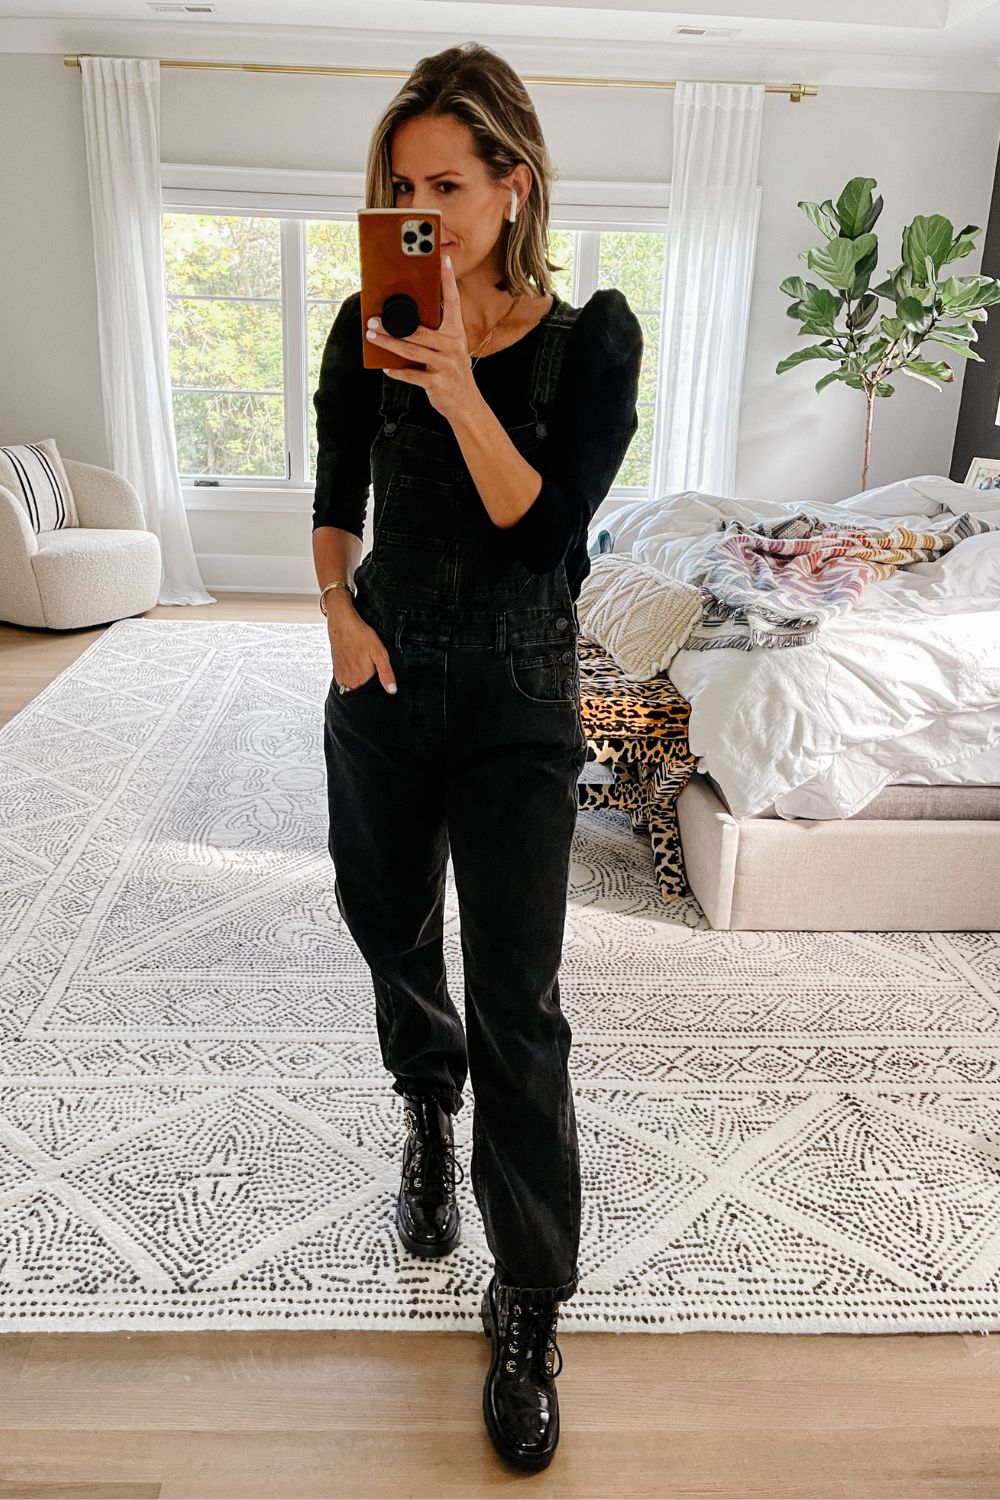 Suzanne wearing a pair of Free People overalls